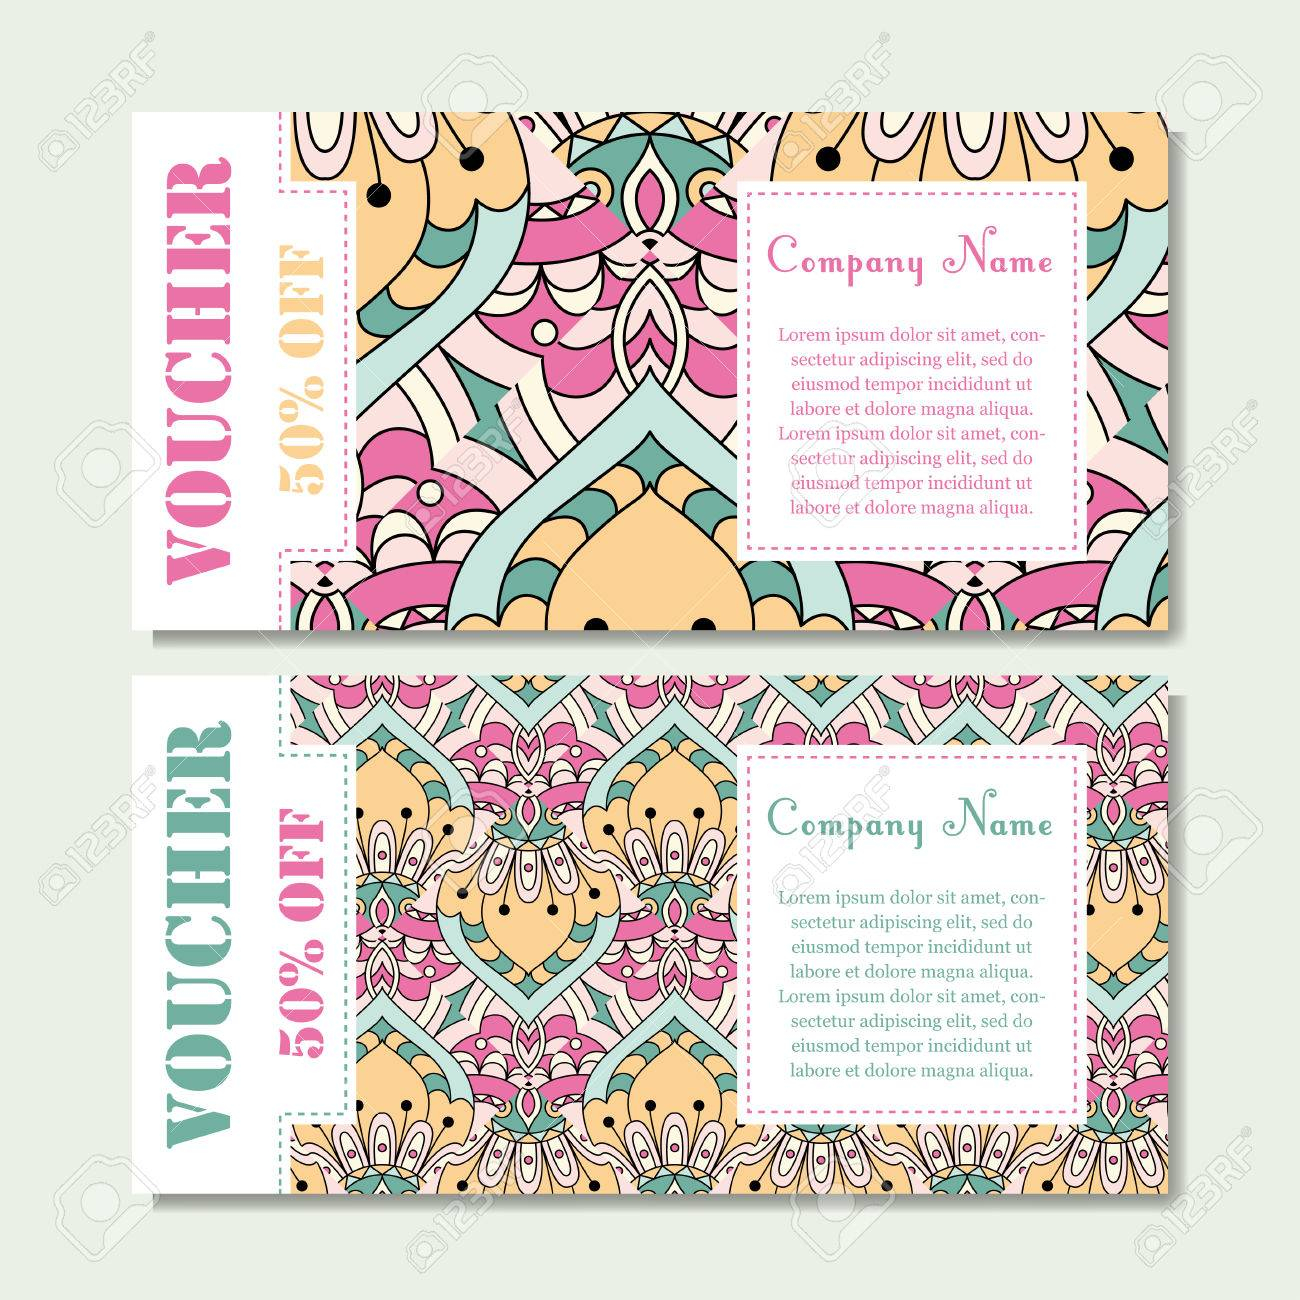 Gift Voucher Template With Mandala